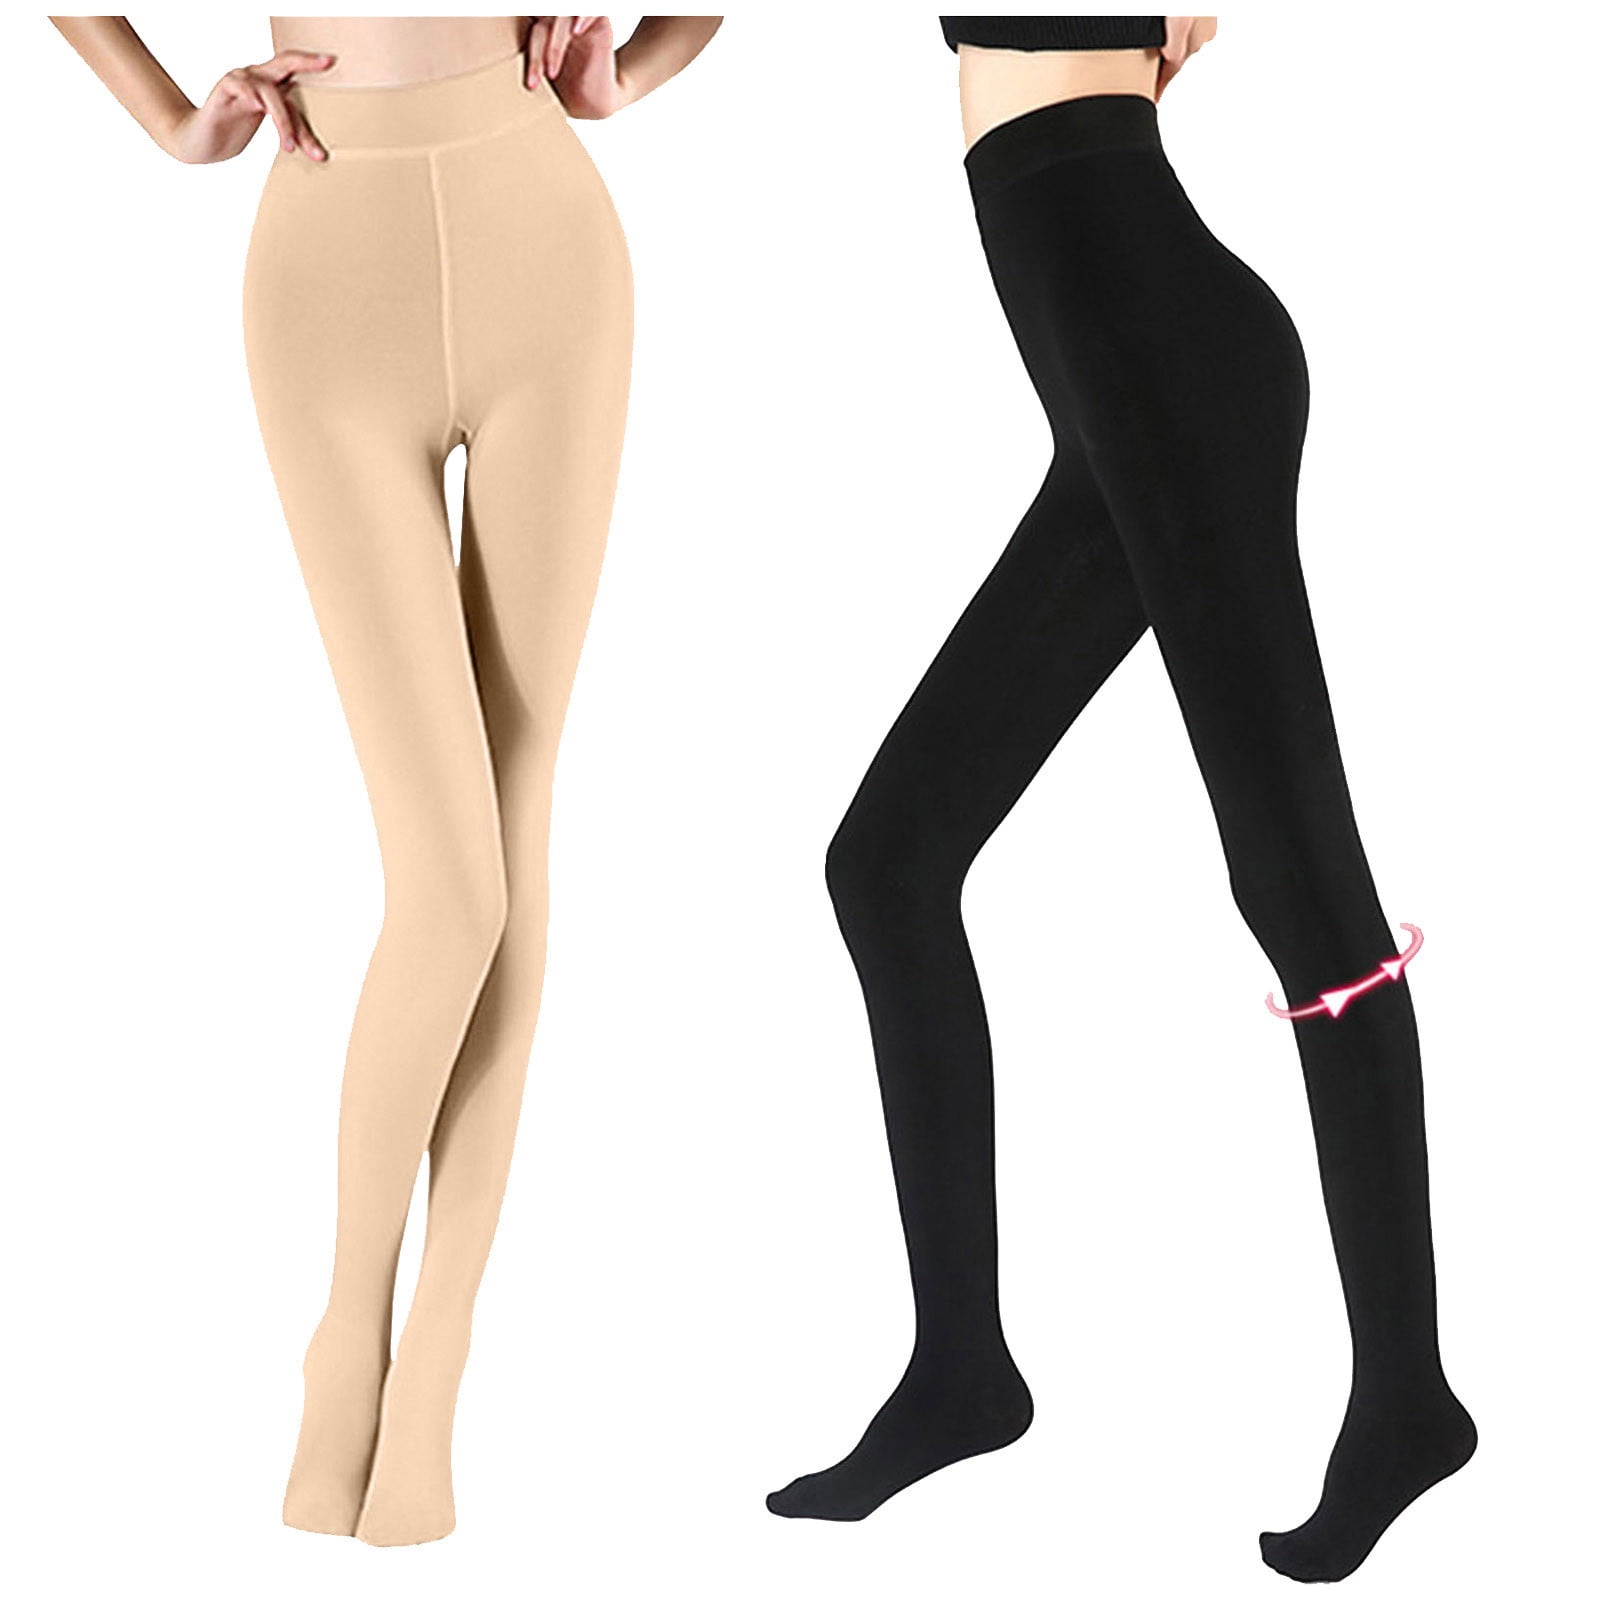 2 Pairs Tights for Women Winter Thermal Pantyhose High Waist